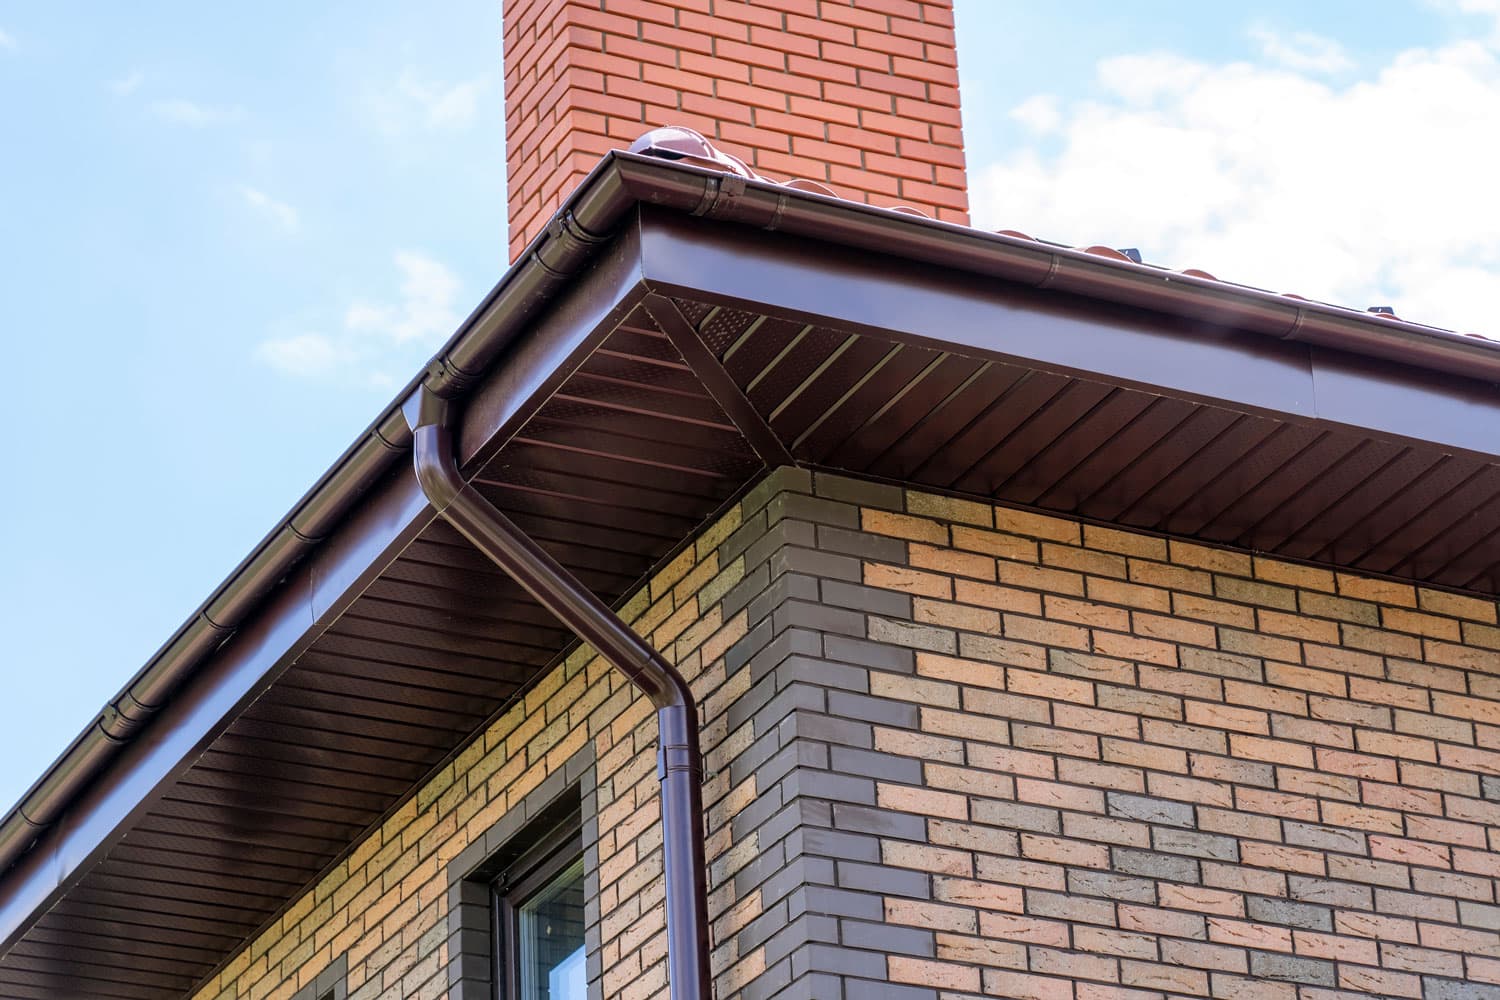 A brown painted soffit board with a downspout